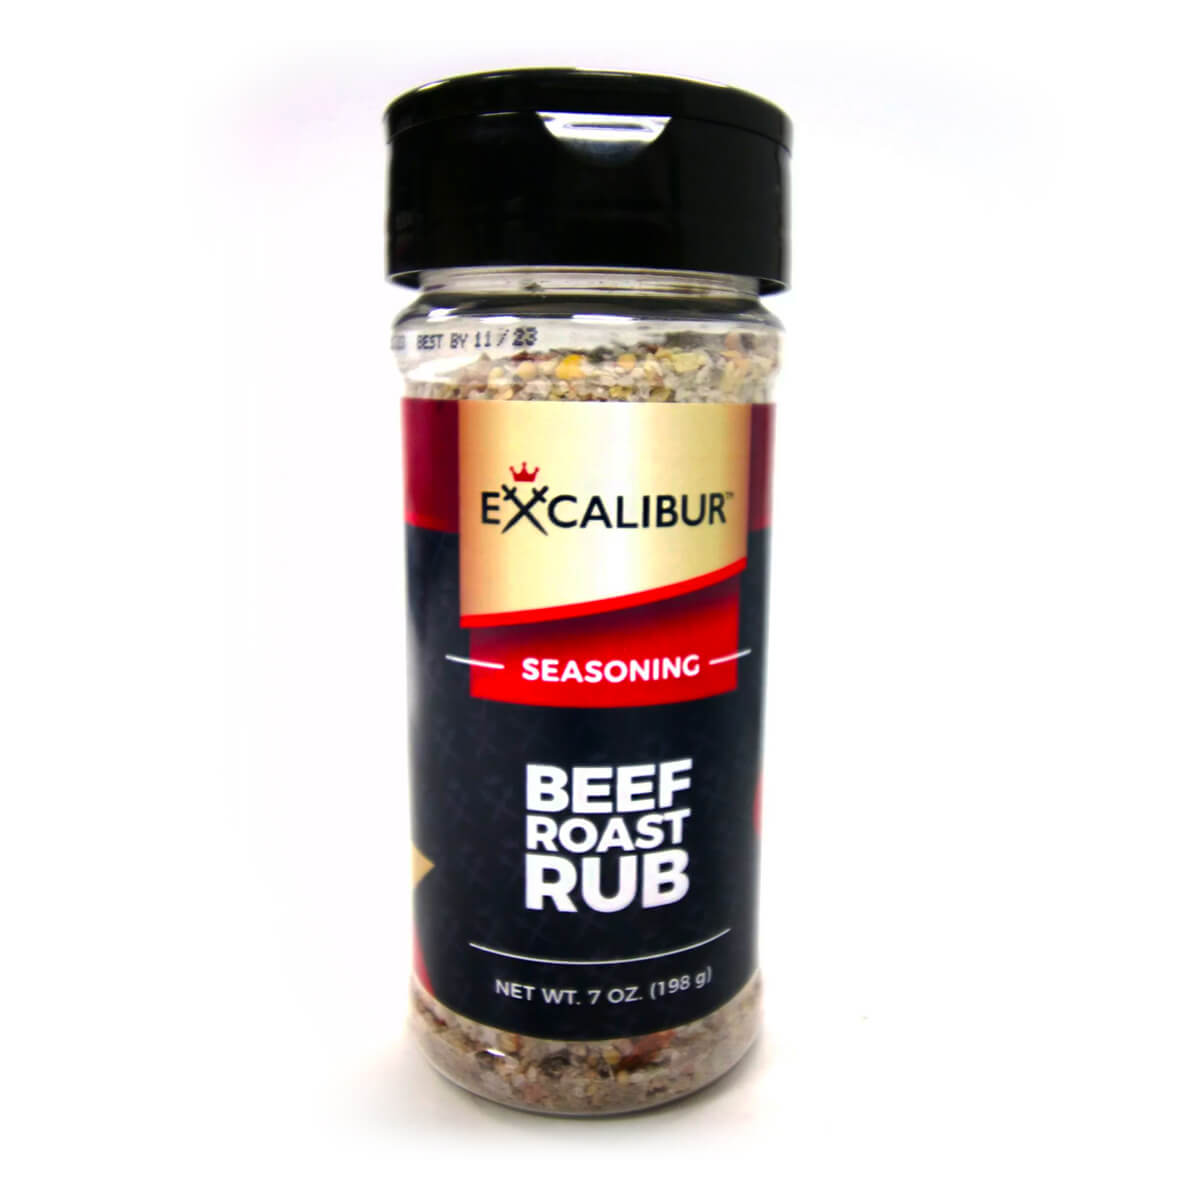 https://www.northcentralfoods.com/wp-content/uploads/2022/10/Beef-Roast-Rub-Cropped.jpg